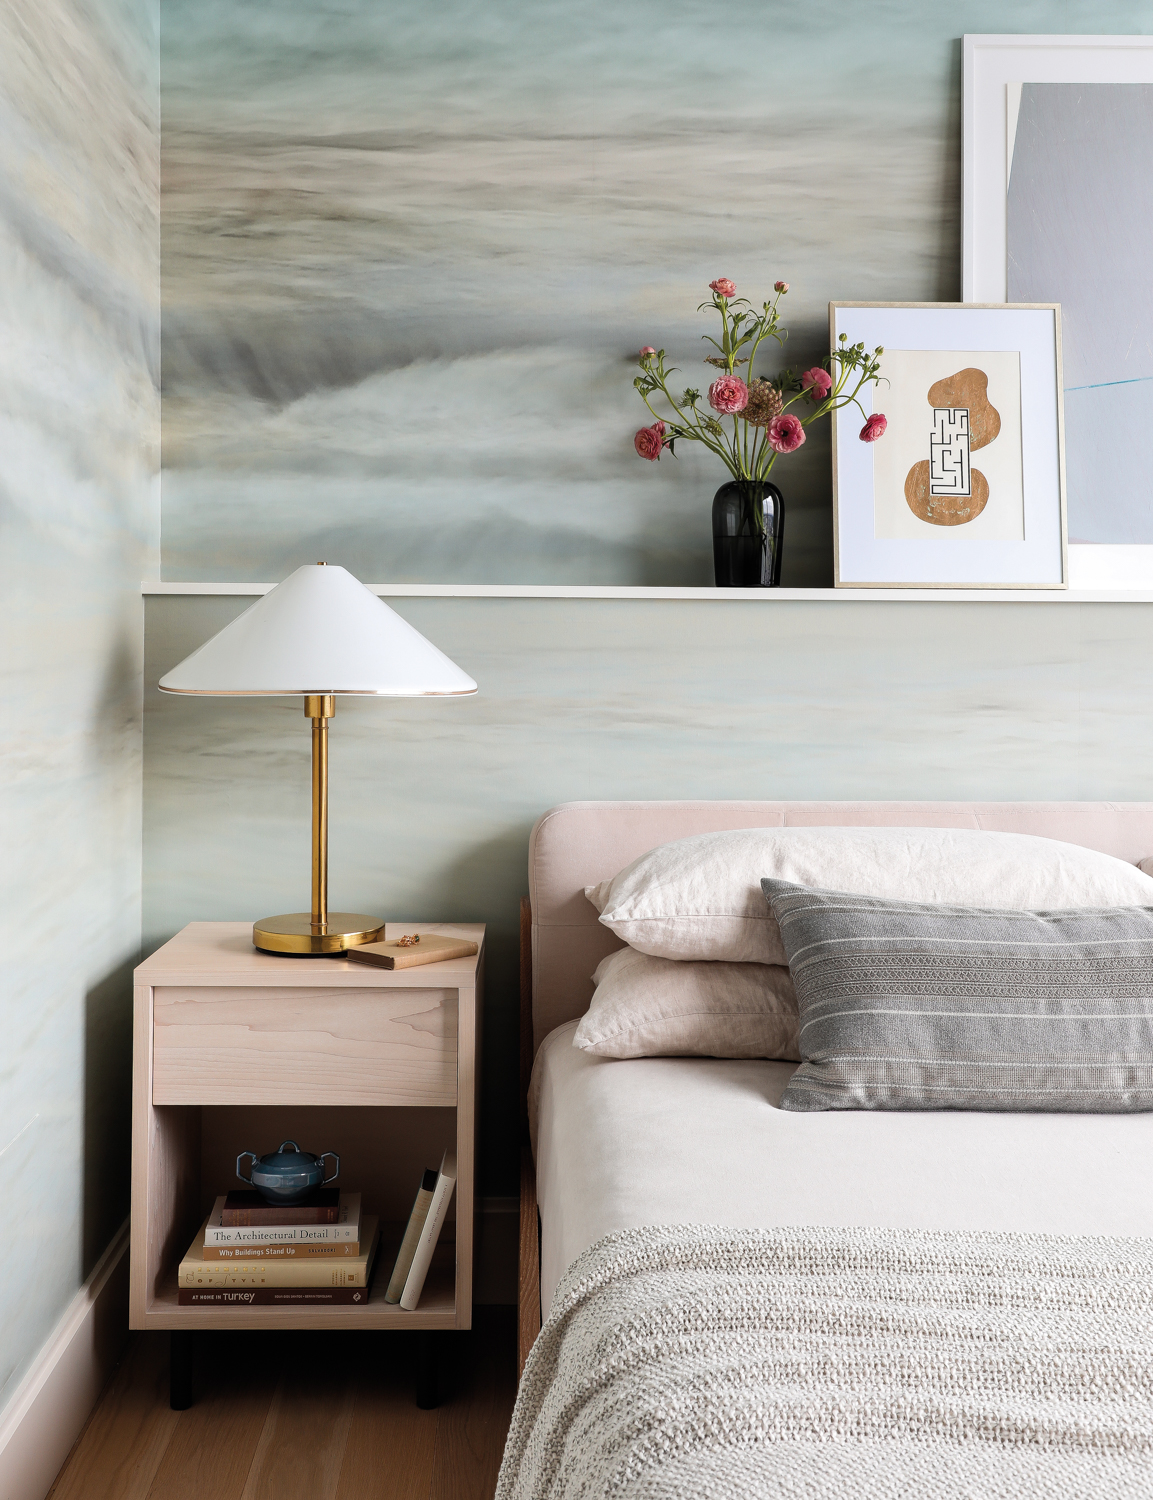 A bedroom has a wave-patterned...